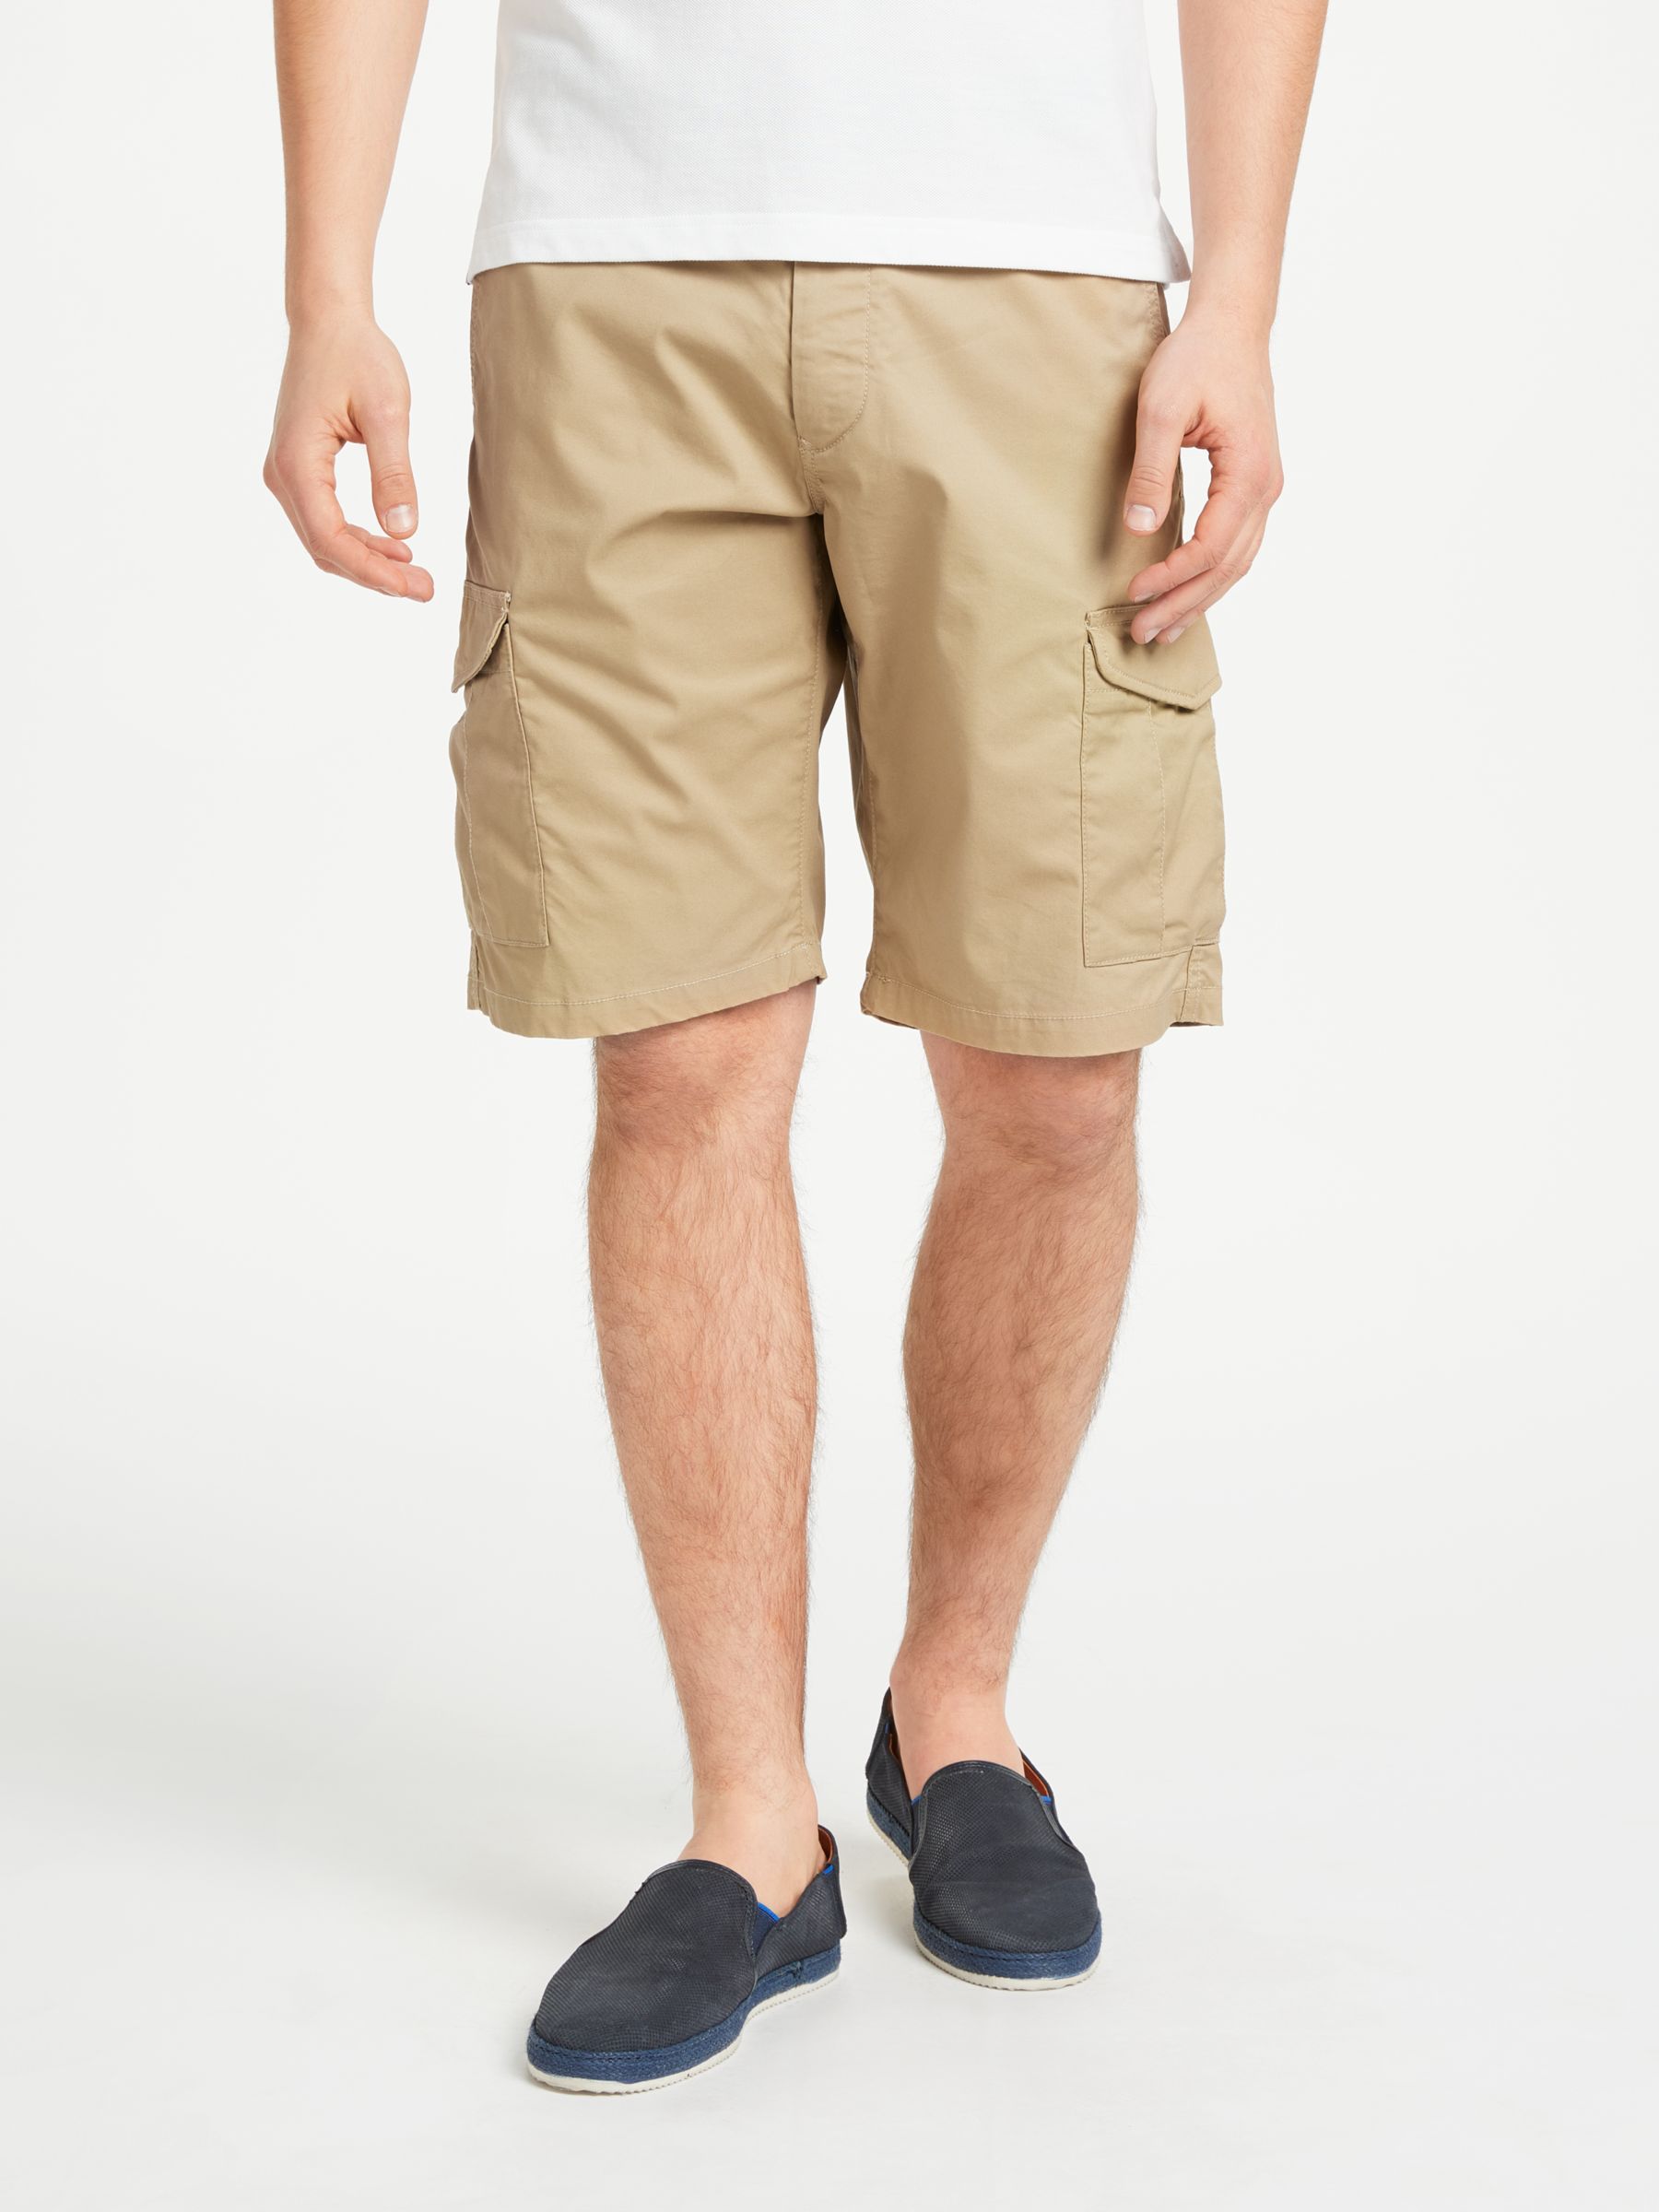 Gant Relaxed Belted Cargo Shorts, Stone, 38R